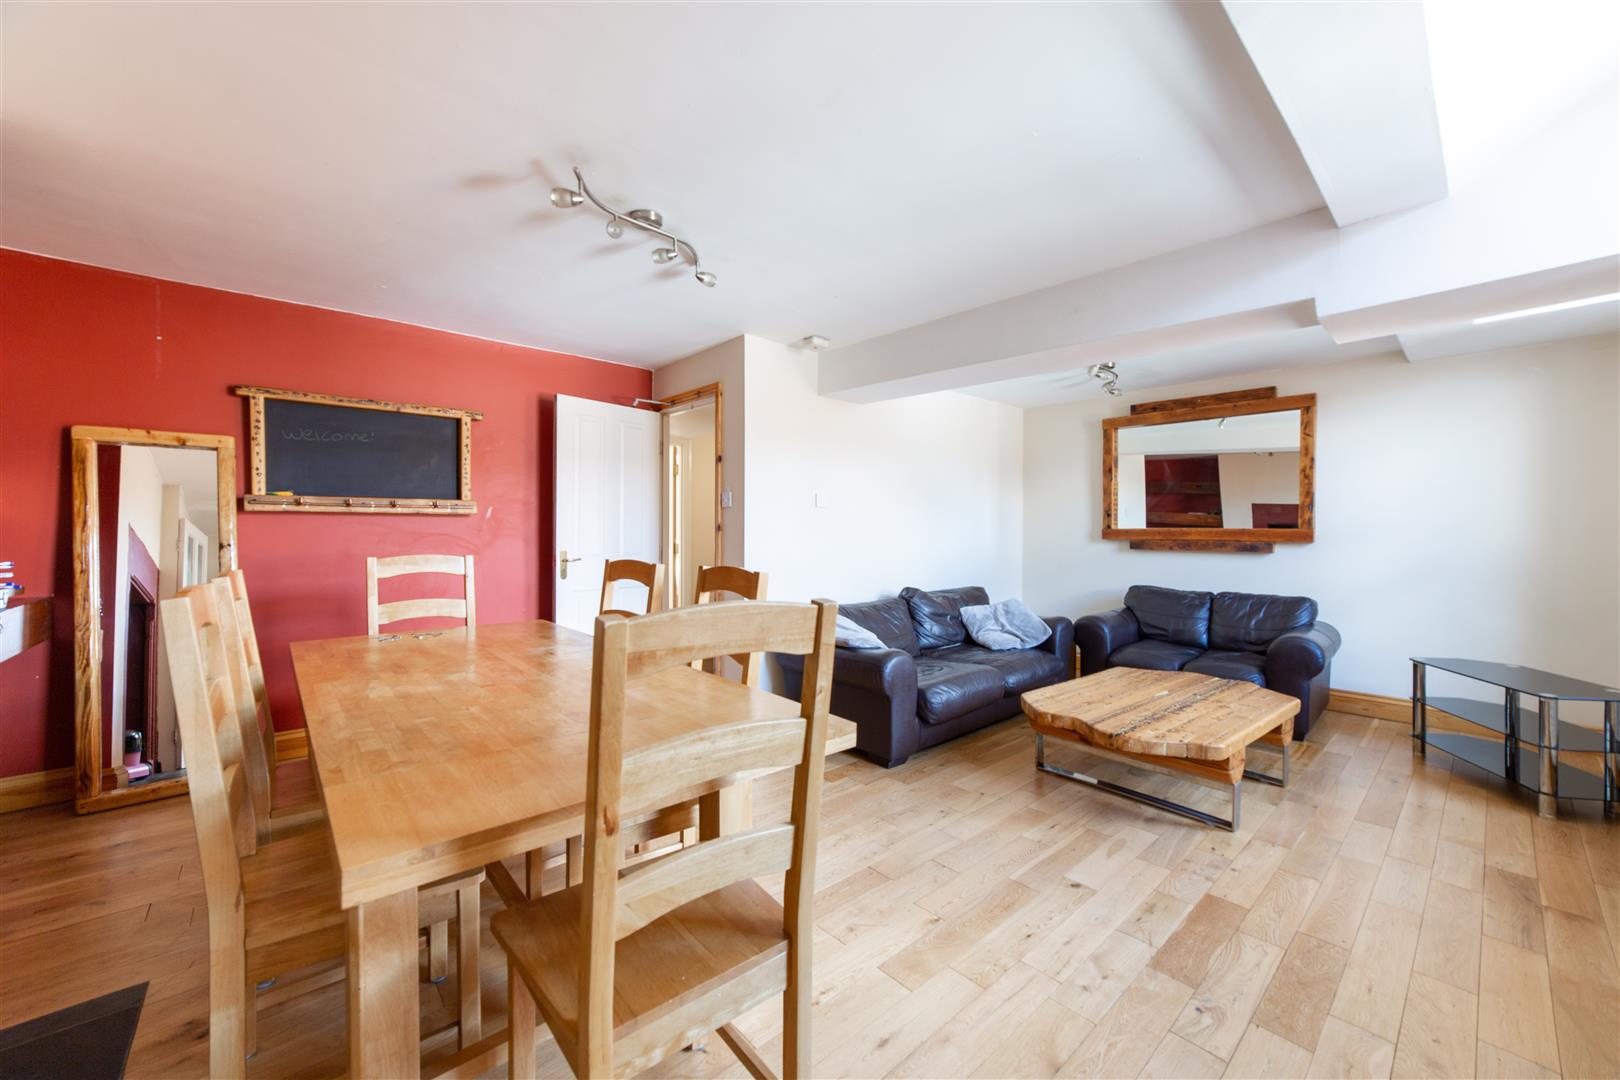 4 bed maisonette to rent in Simonside Terrace, Newcastle Upon Tyne - Property Image 1